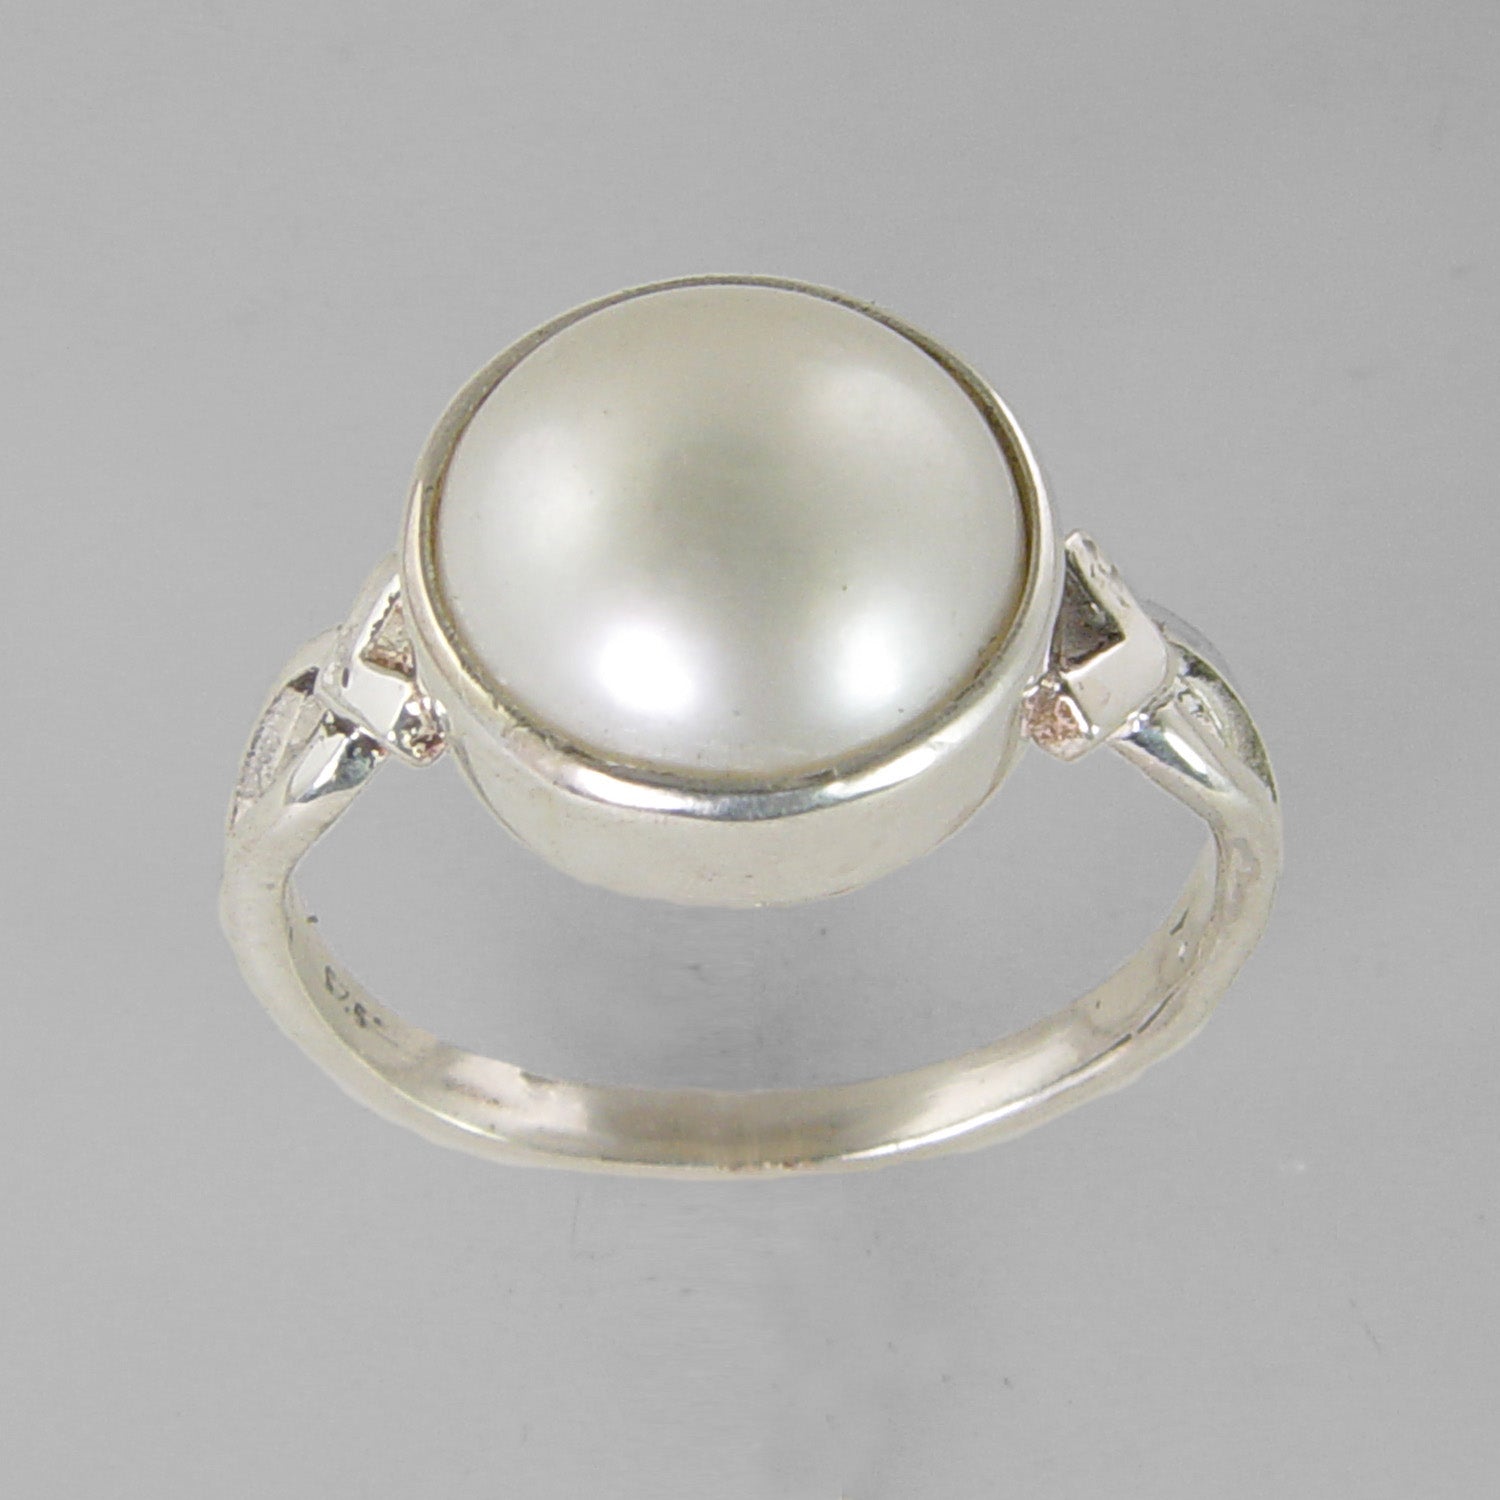 Buy Natural White Pearl/moti Astrological Ring,in Sterling Silver925,  Handmade Ring for Men and Women Online in India - Etsy